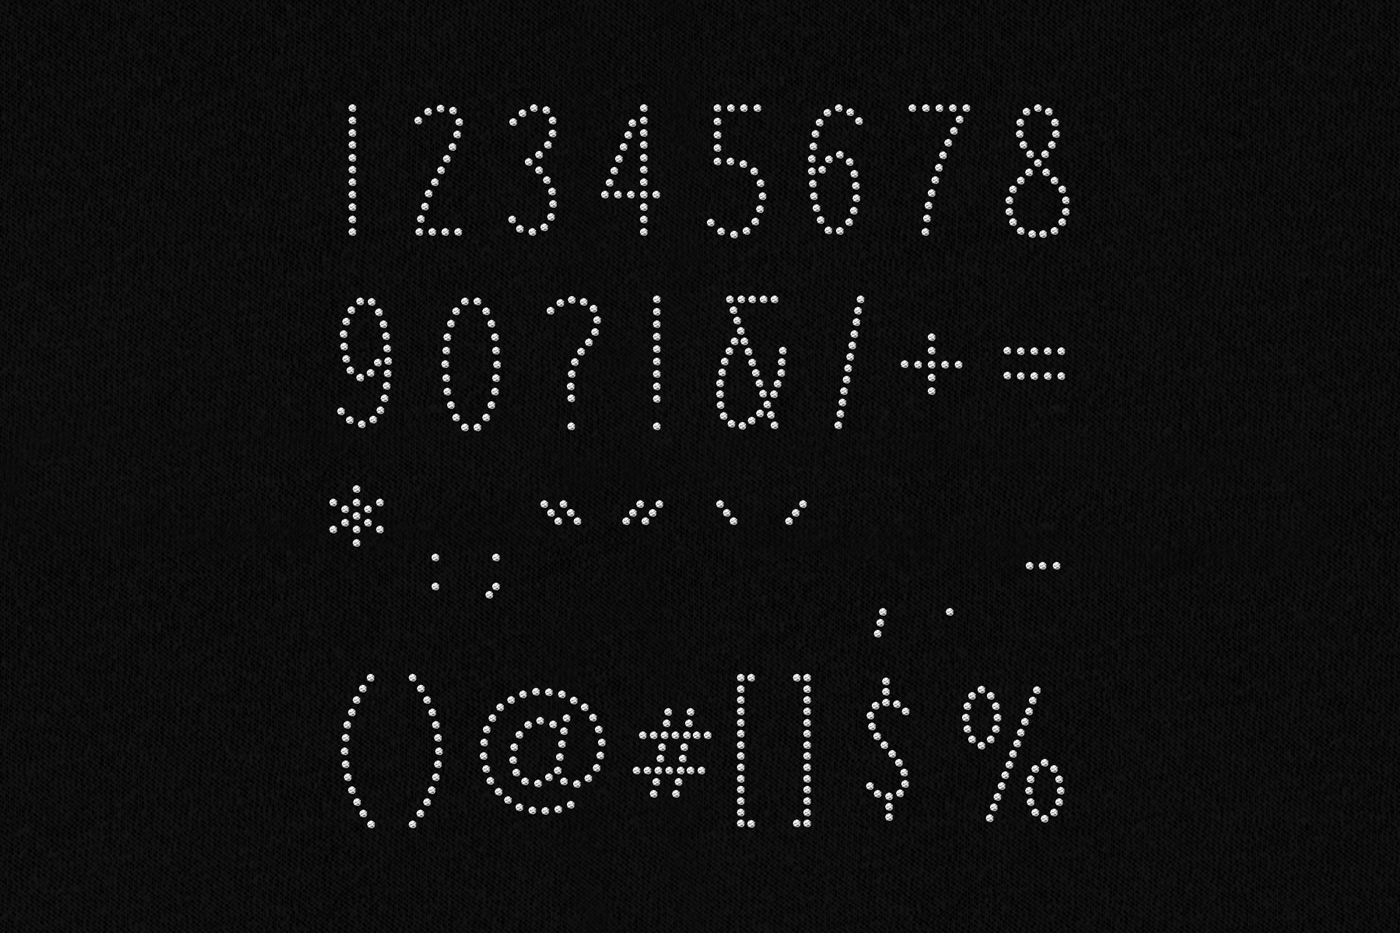 Numbers and punctuation made out of clear rhinestones on a black background in an art deco style.